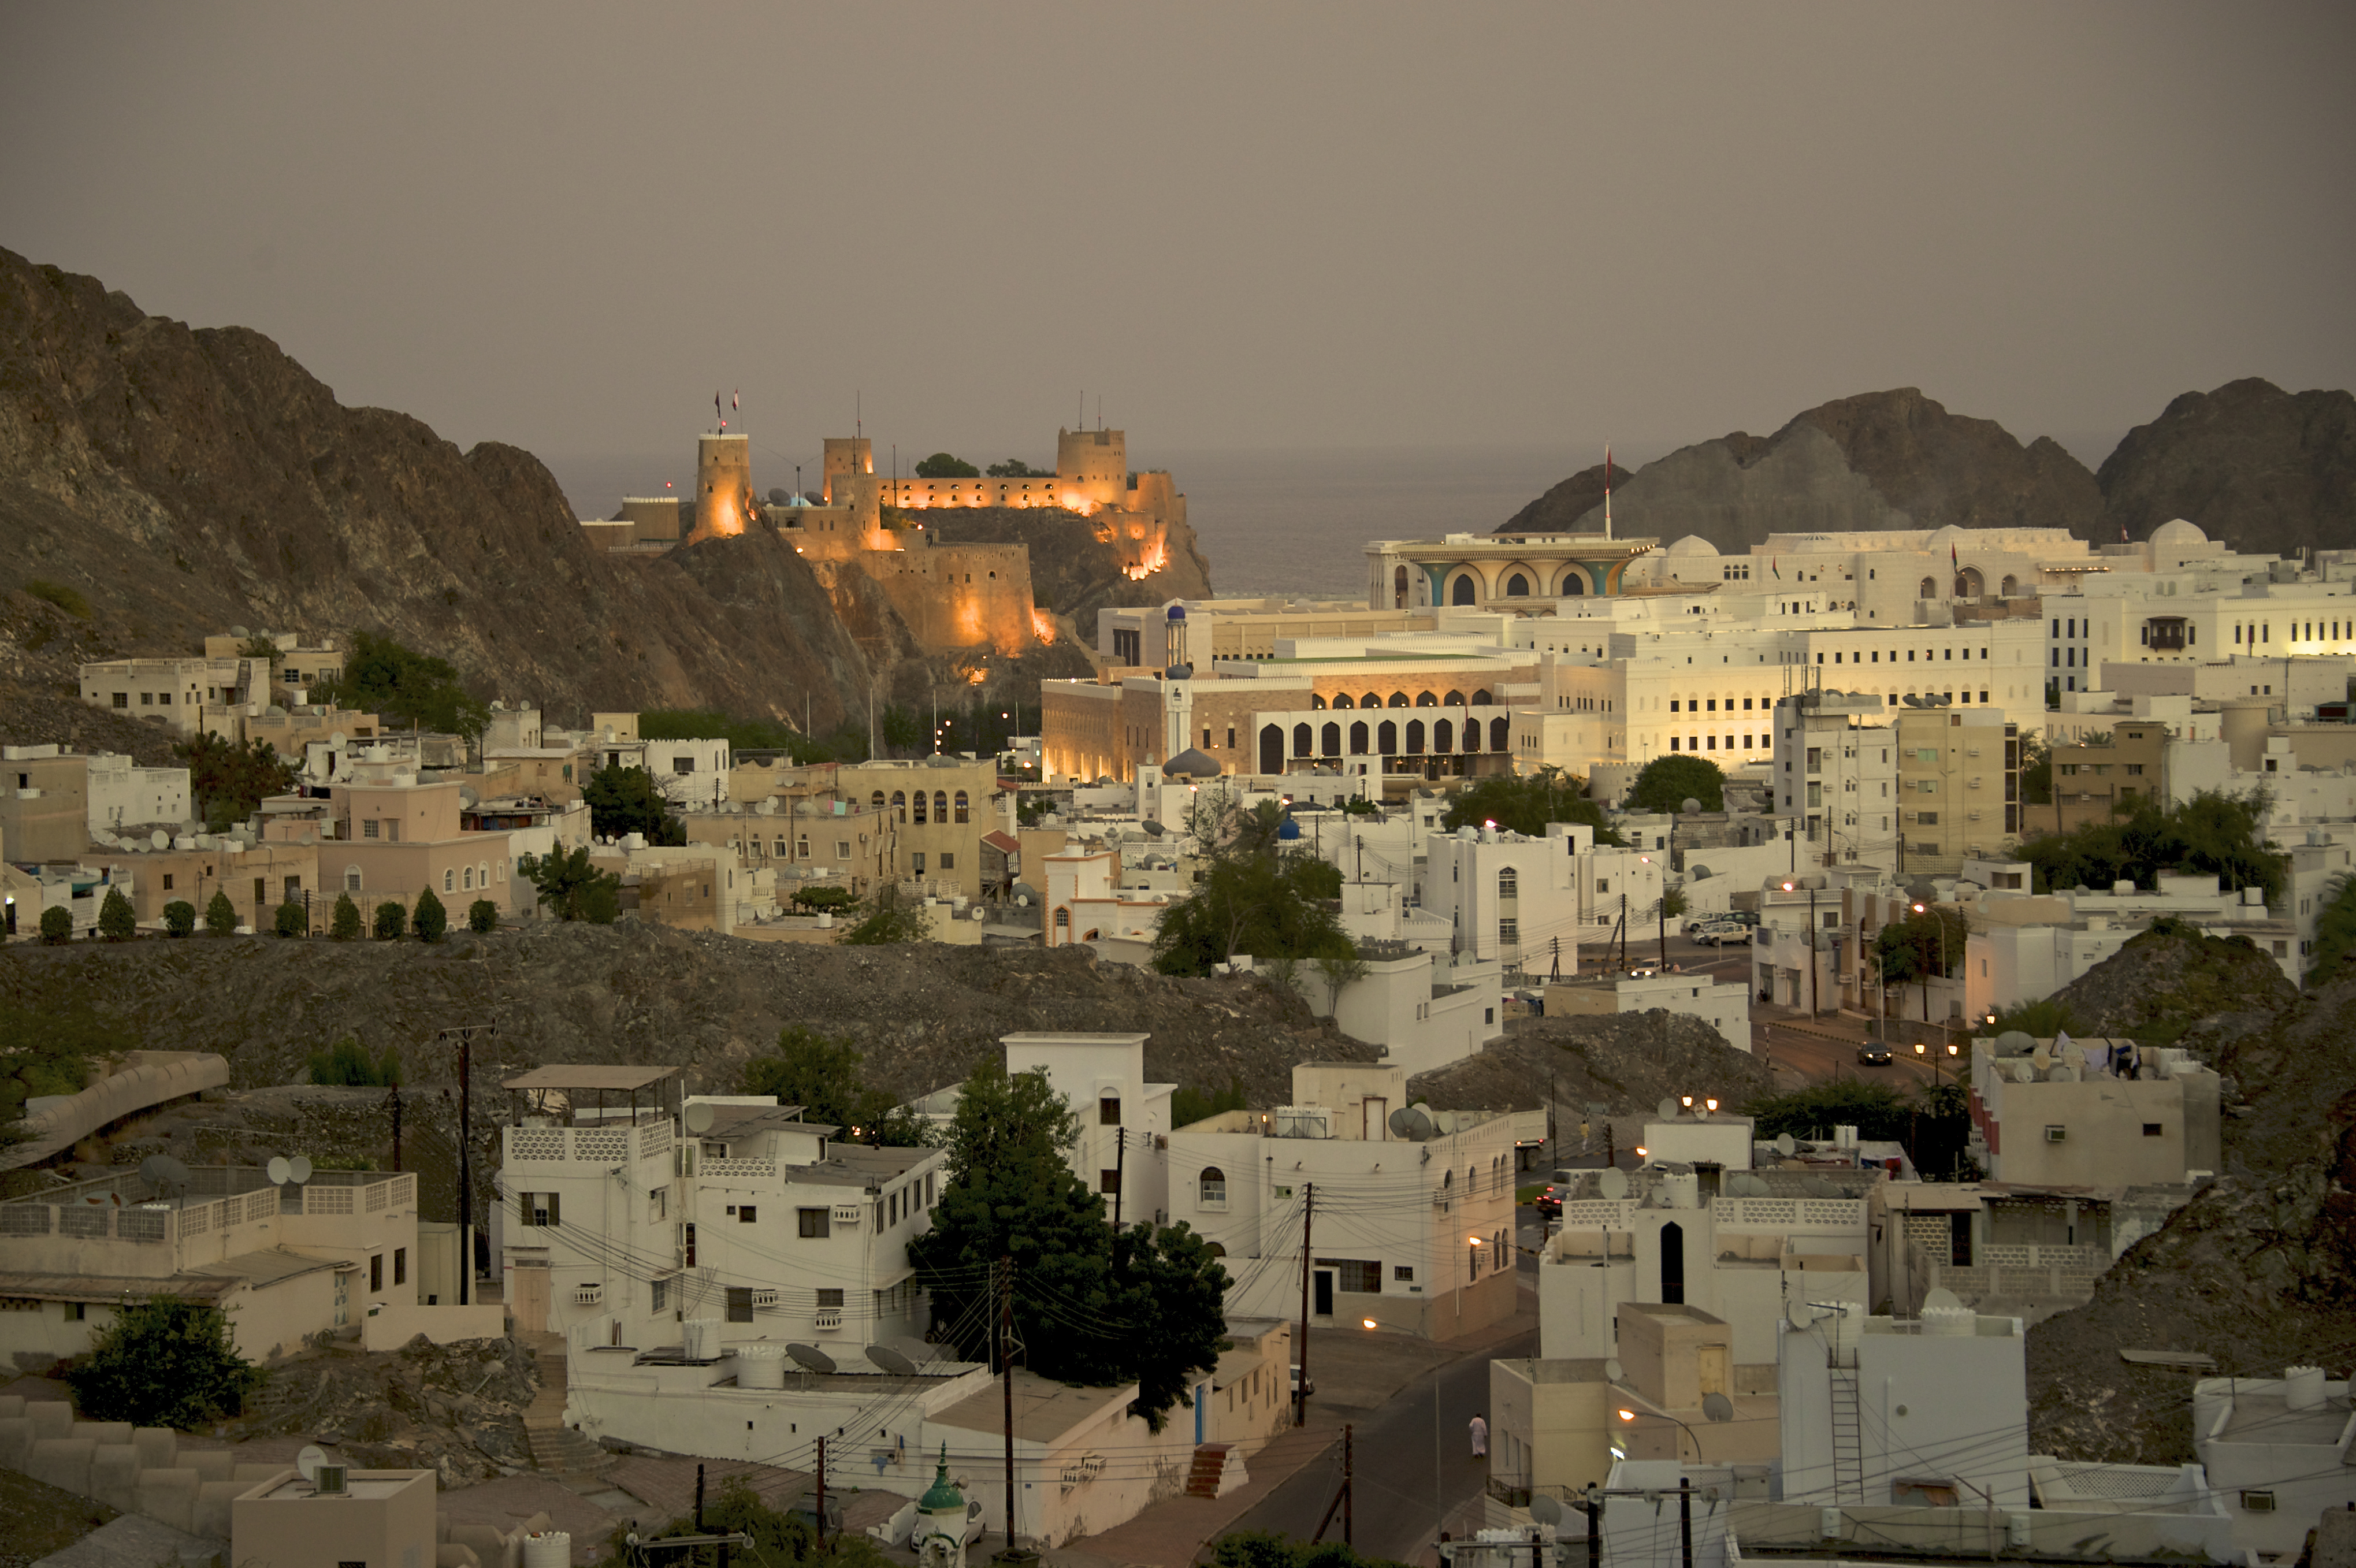 Al Mirani Fort | Muscat, Oman Attractions - Lonely Planet